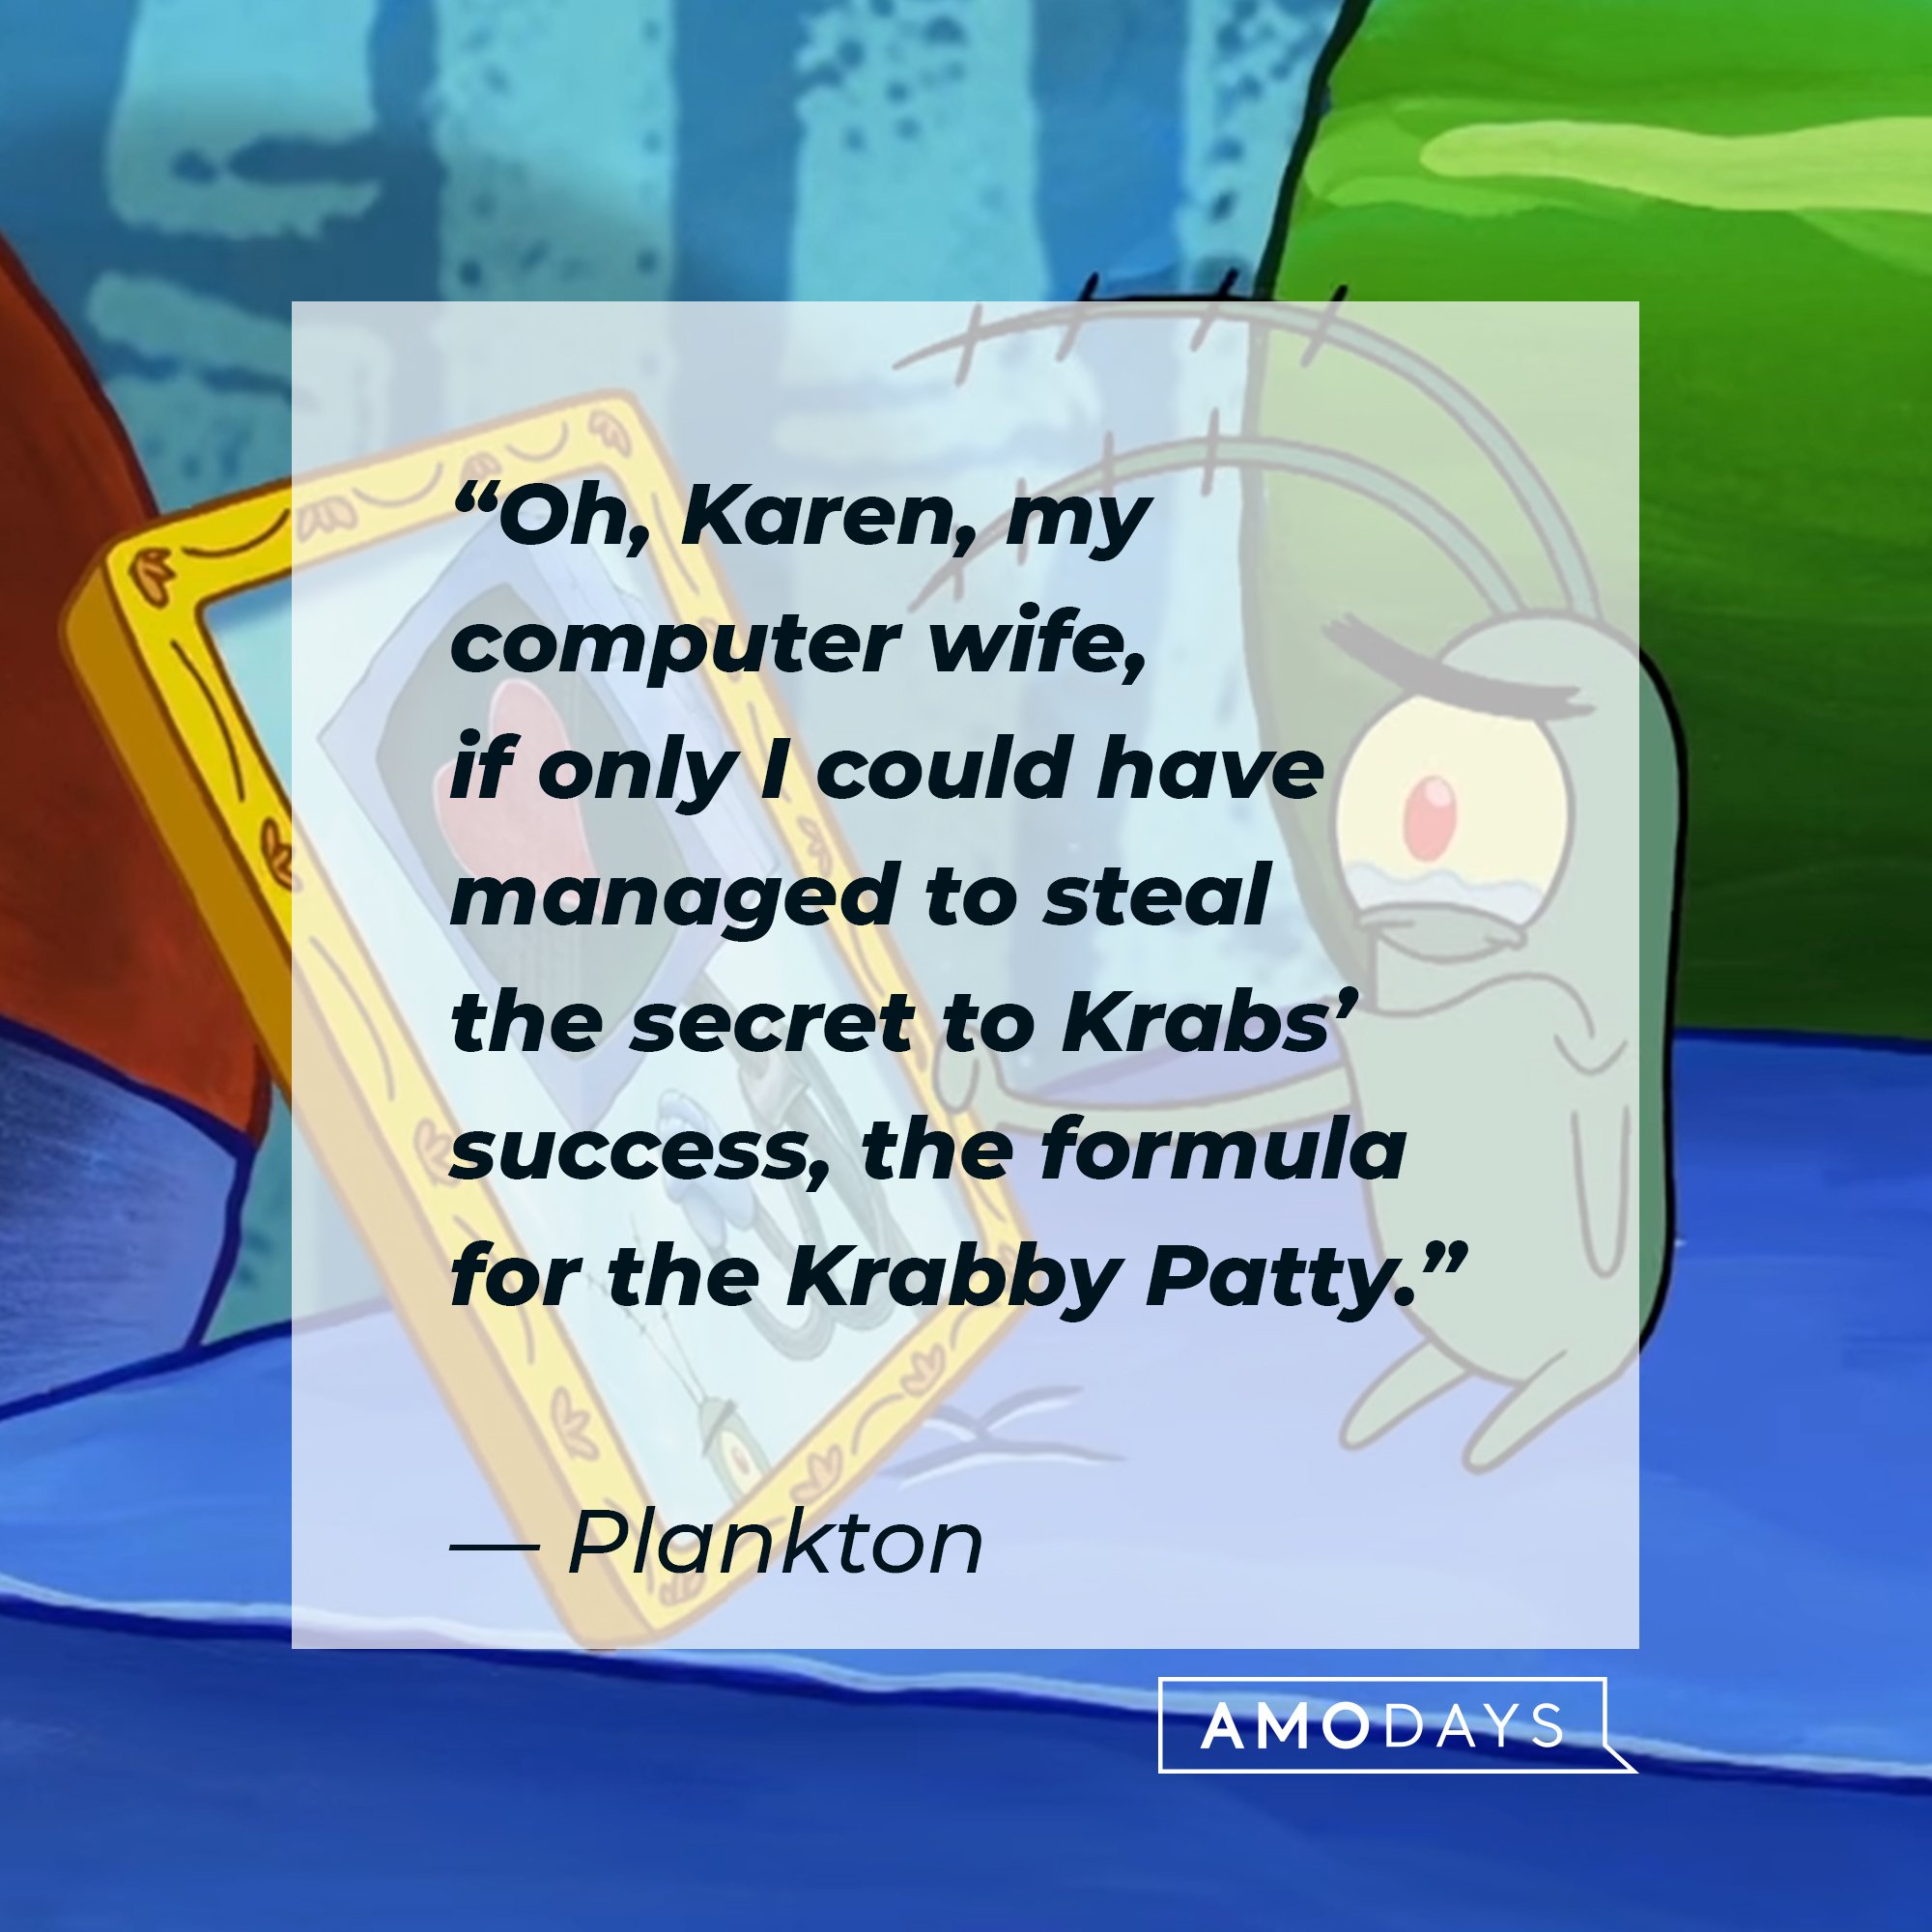 Plankton's quote: “Oh, Karen, my computer wife, if only I could have managed to steal the secret to Krabs’ success, the formula for the Krabby Patty.” | Image: AmoDays